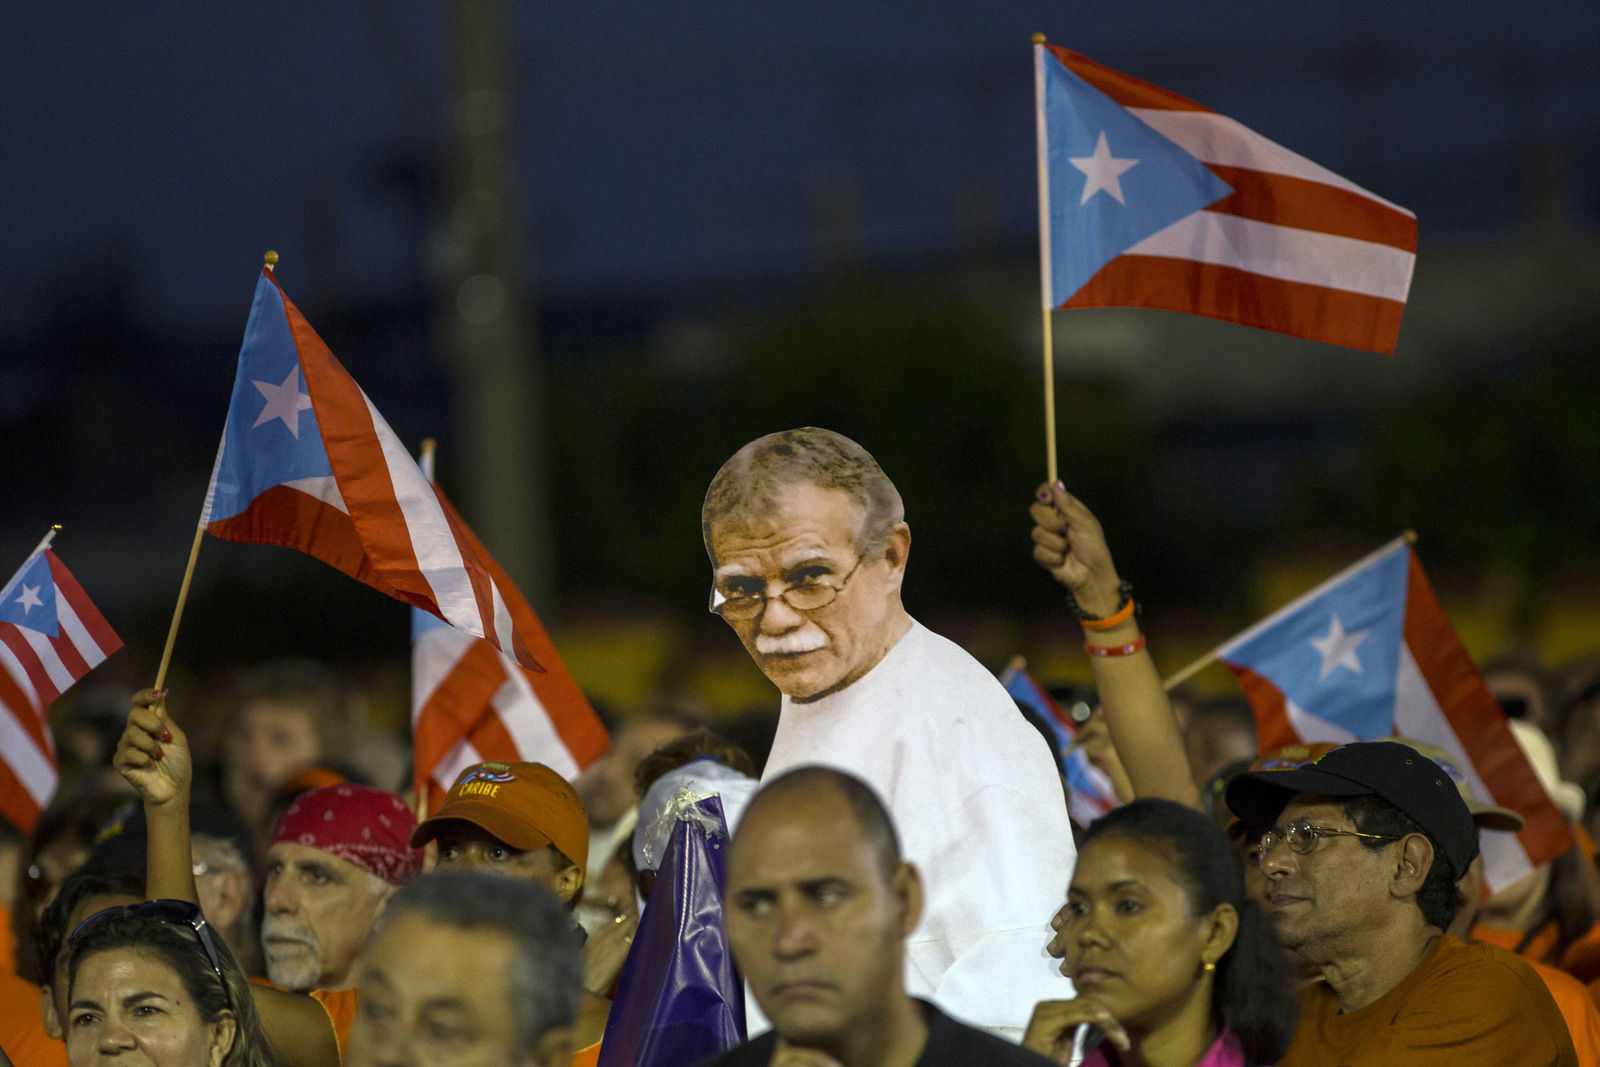 Puerto Rico's activists show a picture of independence fighter Oscar López Rivera, center, jailed in the United States, during an event celebrating Revolution Day in Santiago, Cuba, Sunday, July 26, 2015. Cuba marks the 62st anniversary of the July 26, 1953 rebel attack led by Fidel and Raul Castro on the Moncada military barracks. The attack is considered the beginning of Fidel Castro's revolution that culminated with dictator Fulgencio Batista's ouster. (AP Photo/Ramon Espinosa)